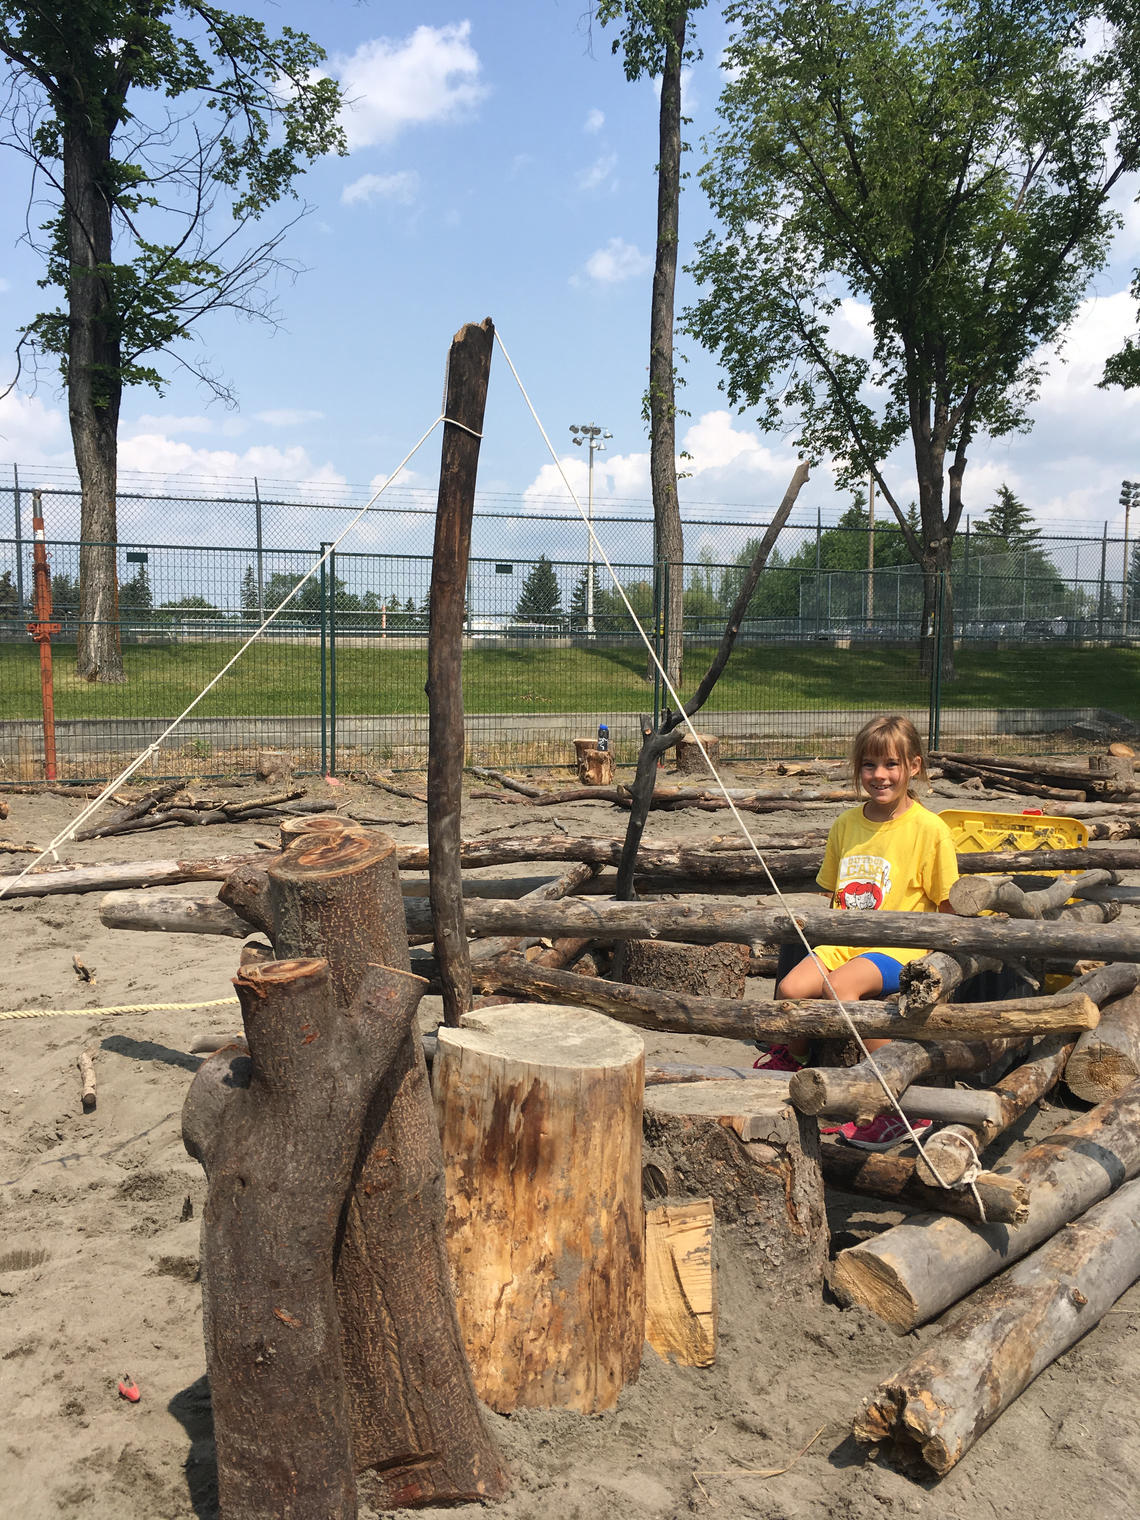 A large variety of building materials are available for summer campers to use their imaginations and interact with nature.